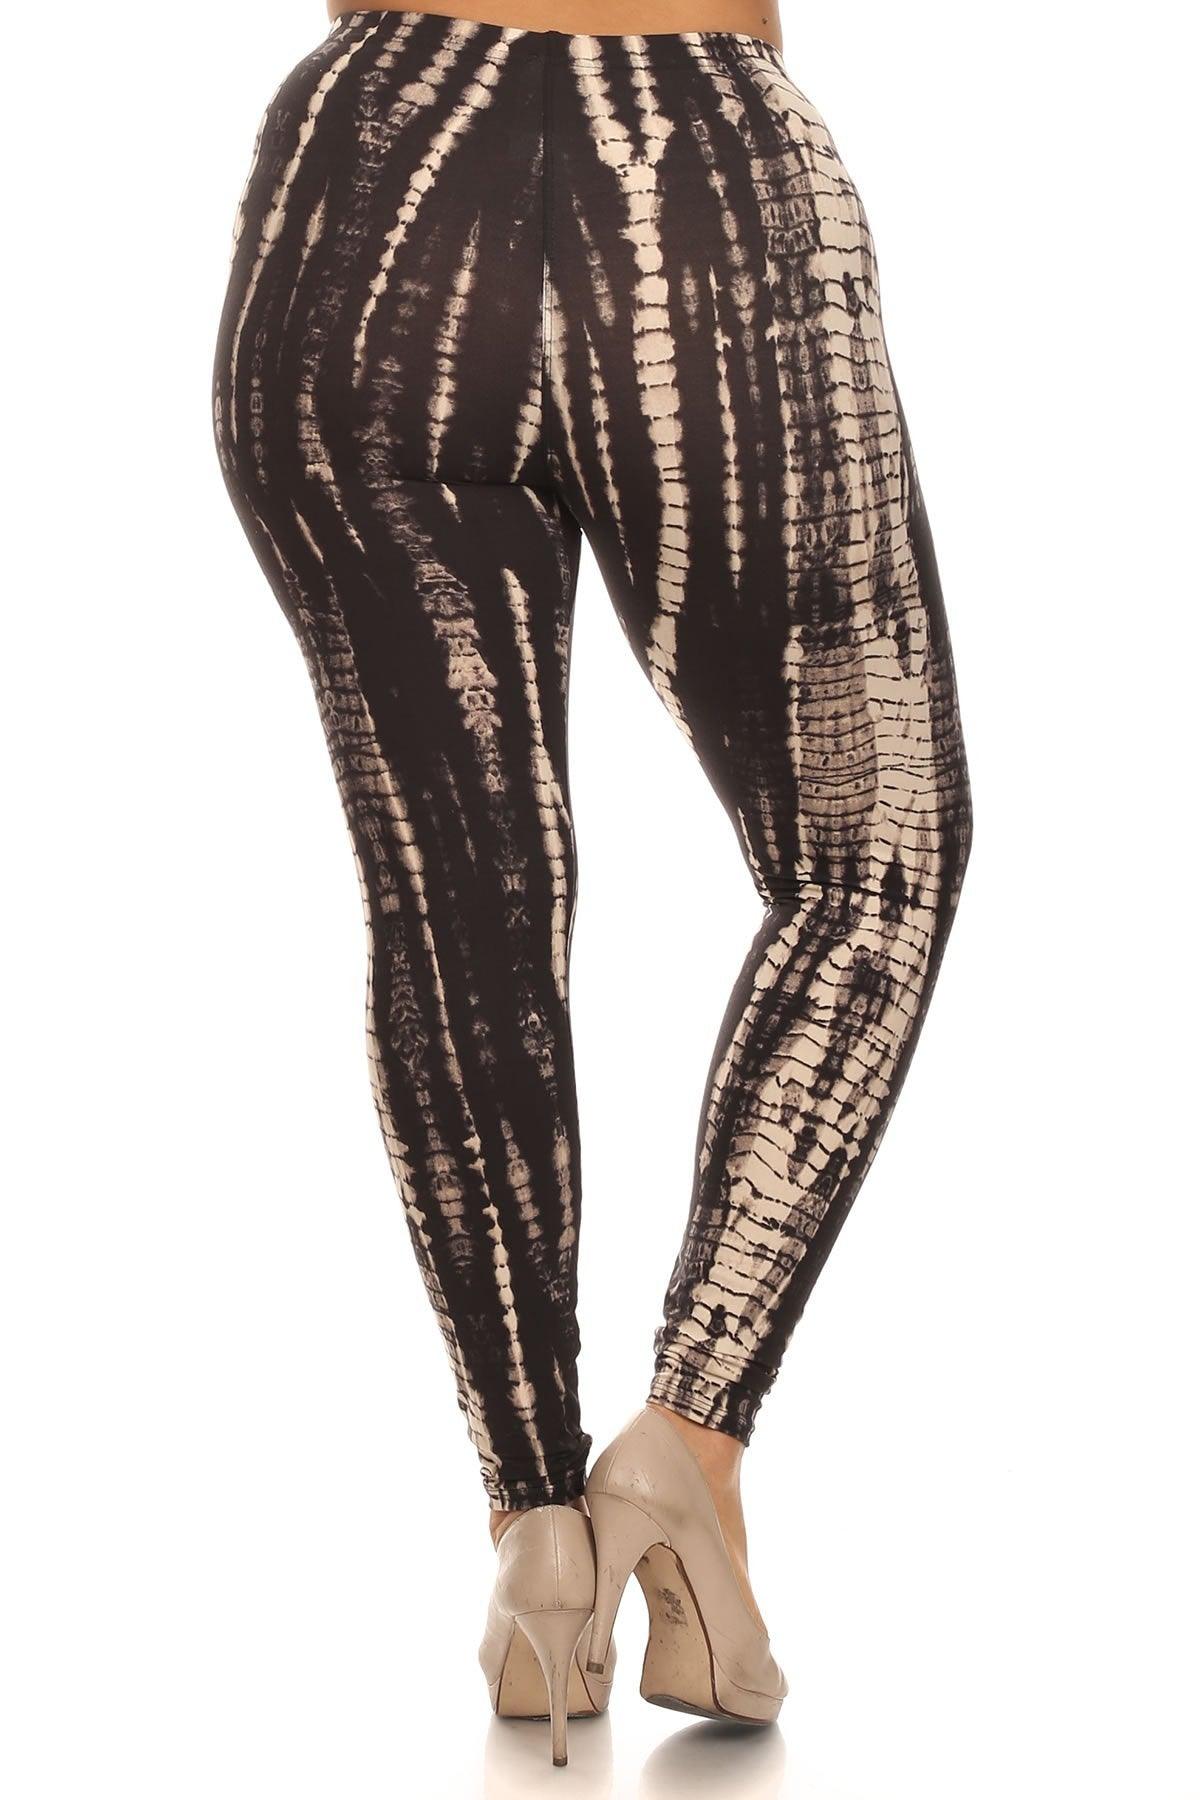 Plus Size Black And Tan Tie Dye Print Full Length Fitted Leggings With High Waist. Naughty Smile Fashion